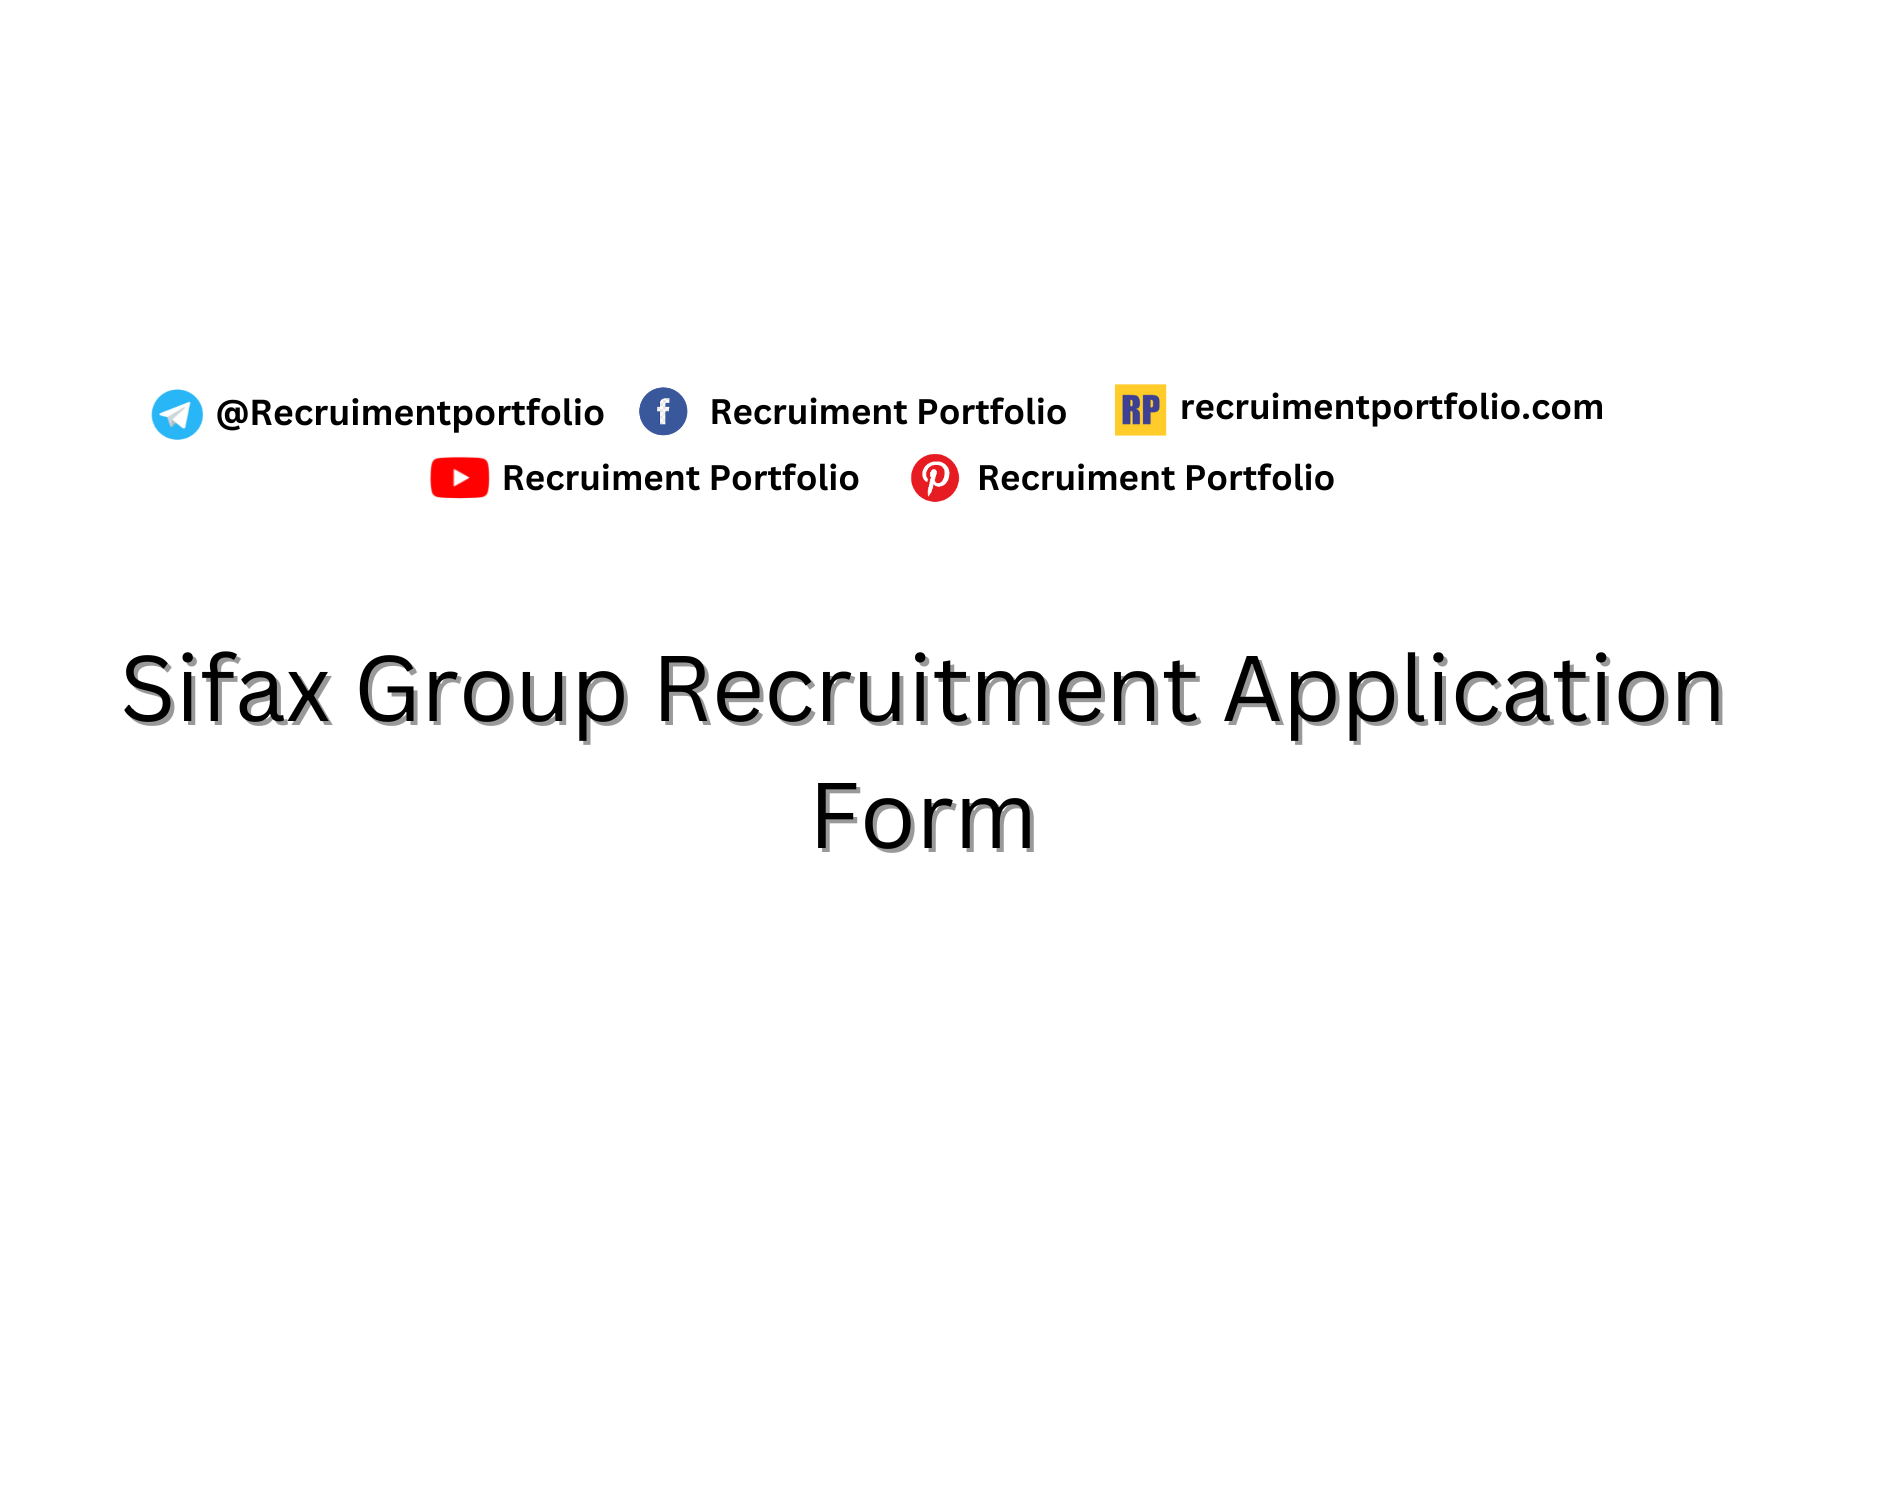 Sifax Group Recruitment